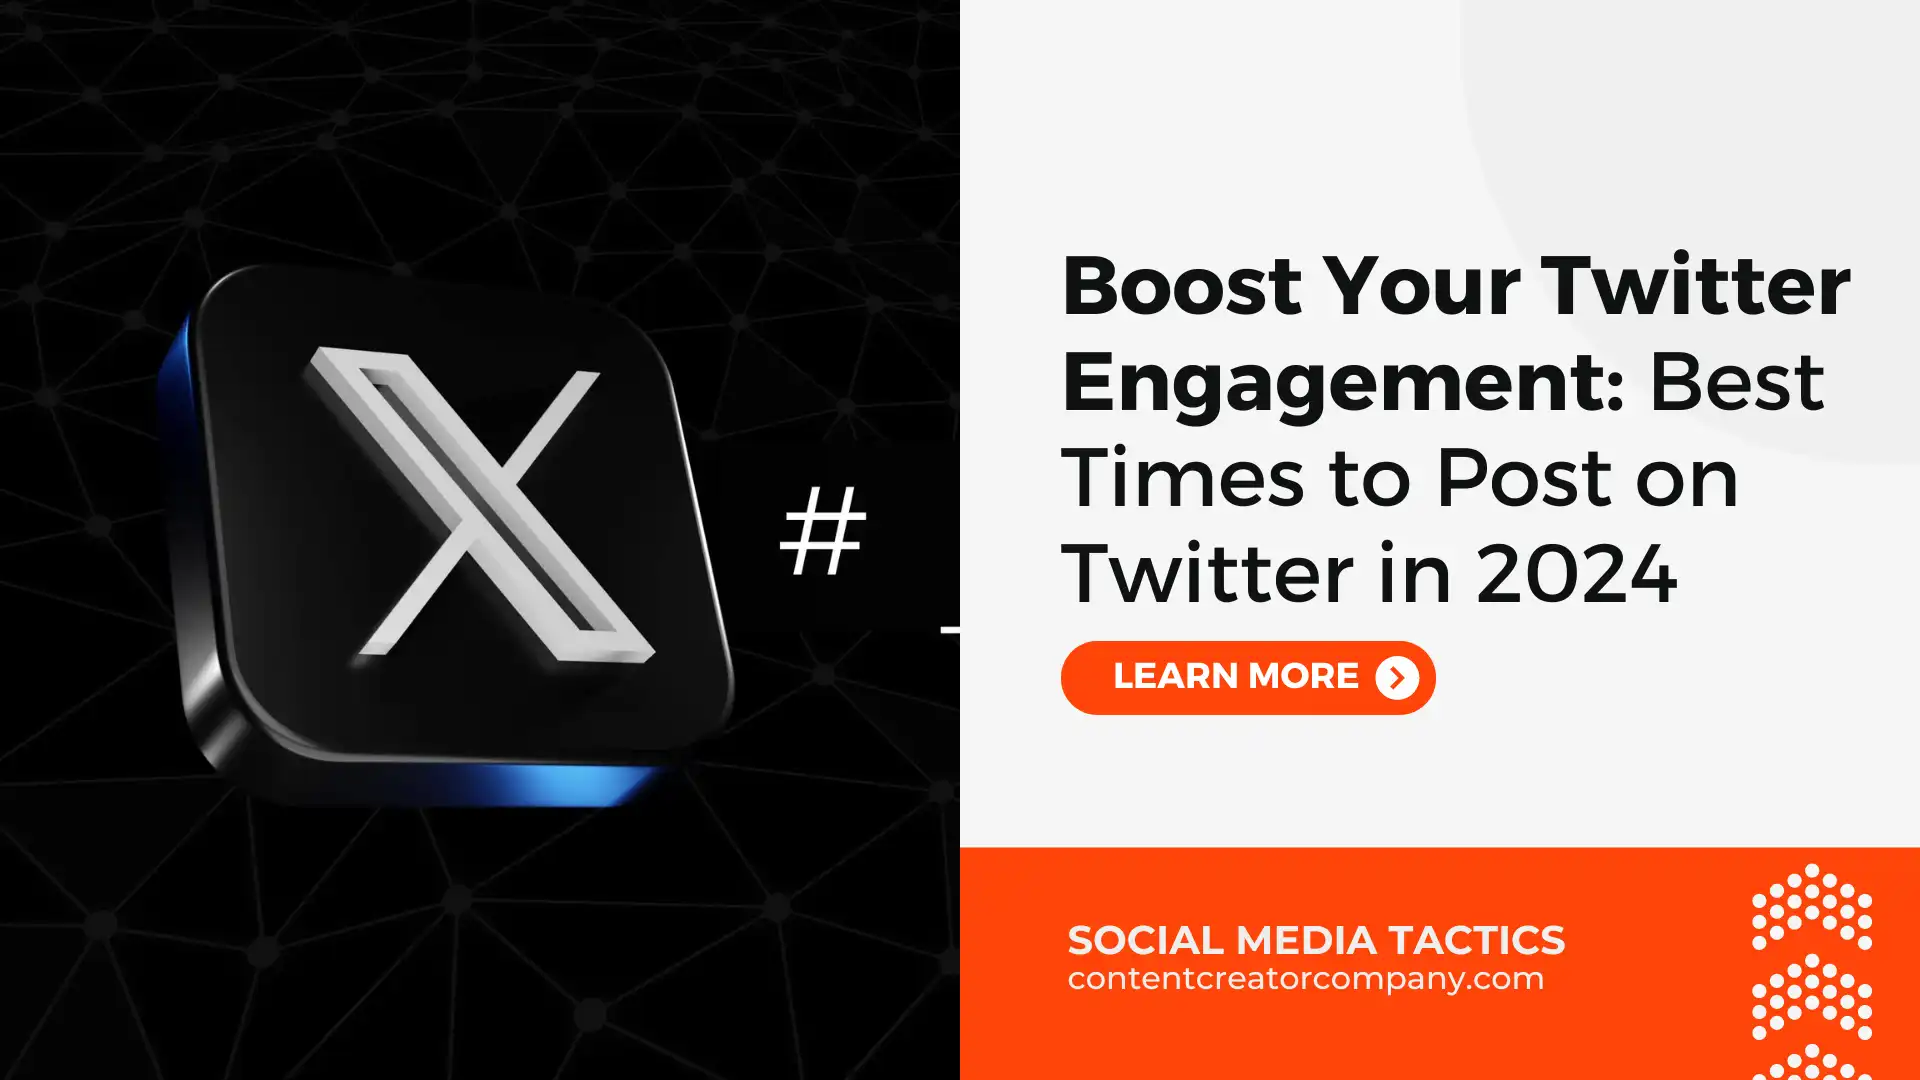 Boost Your Twitter Engagement: Best Times to Post on Twitter 2024